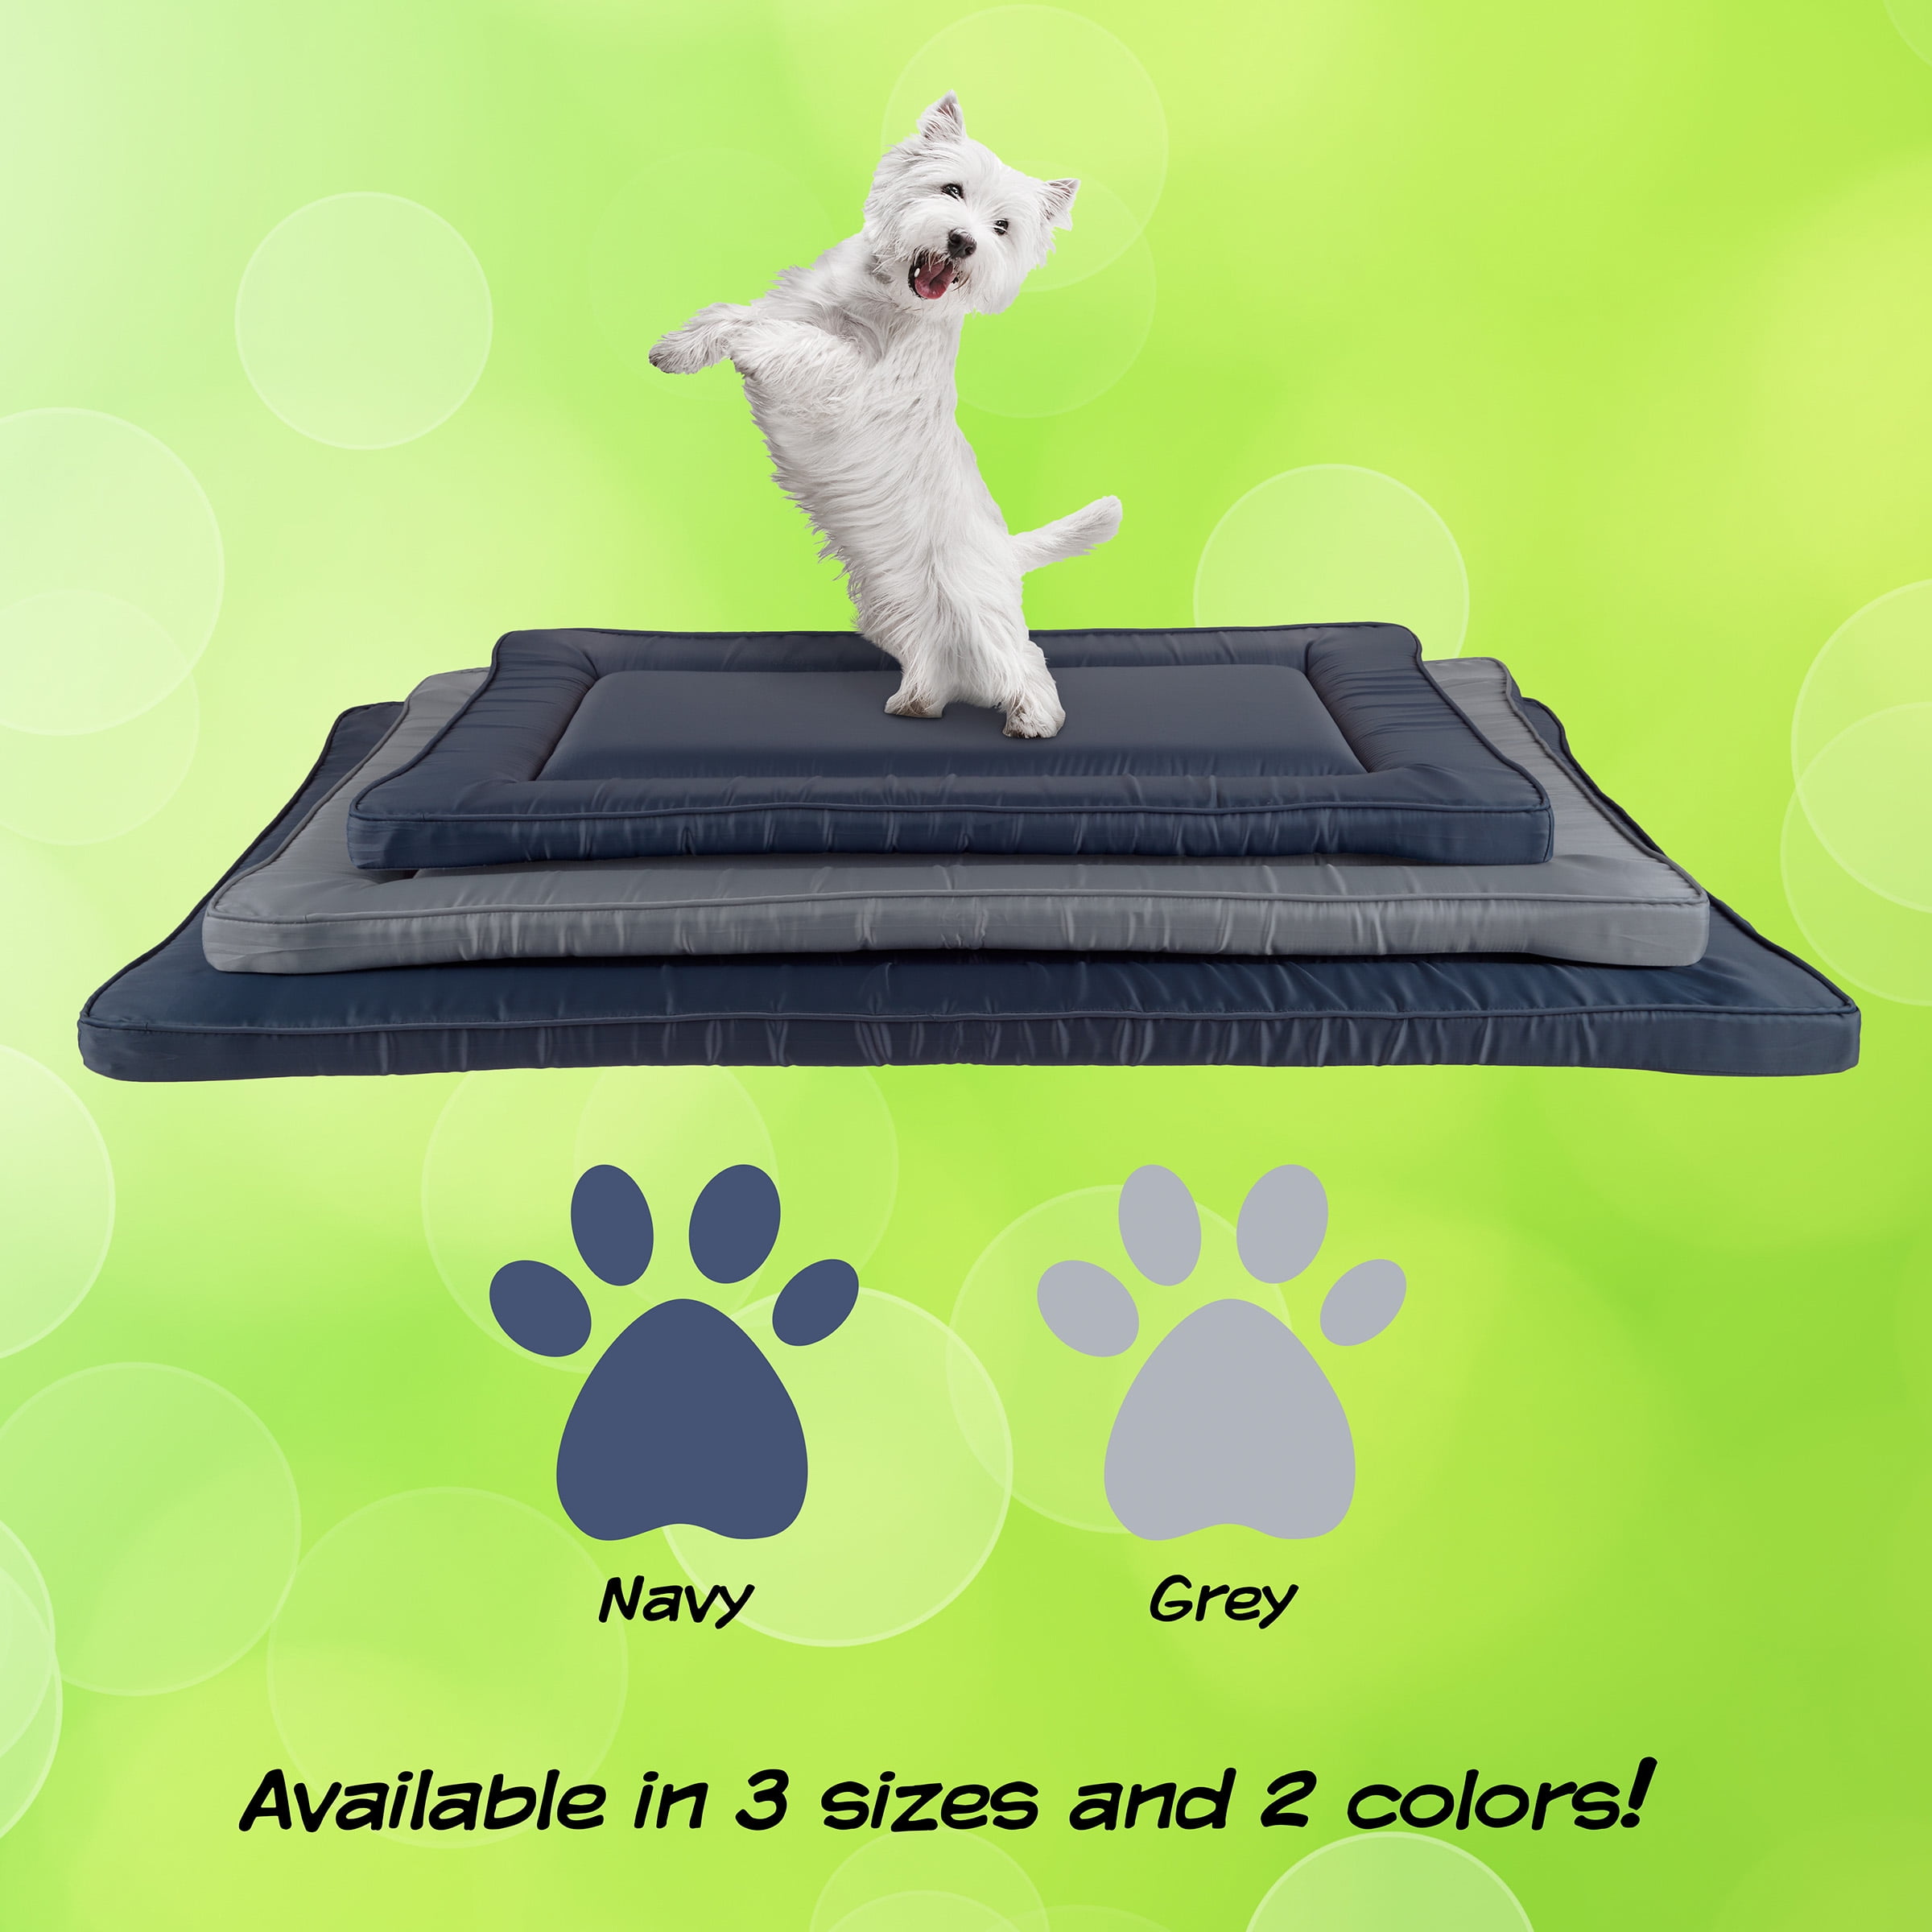  Gorilla Grip Silicone Pet Feeding Mat and Reusable Waterproof  Pet Pad, Feeding Mat is Size 18.5x11.5 in Gray Color, Washable Pad for  Crates and Beds is Size 16x22, 2 Item Bundle 